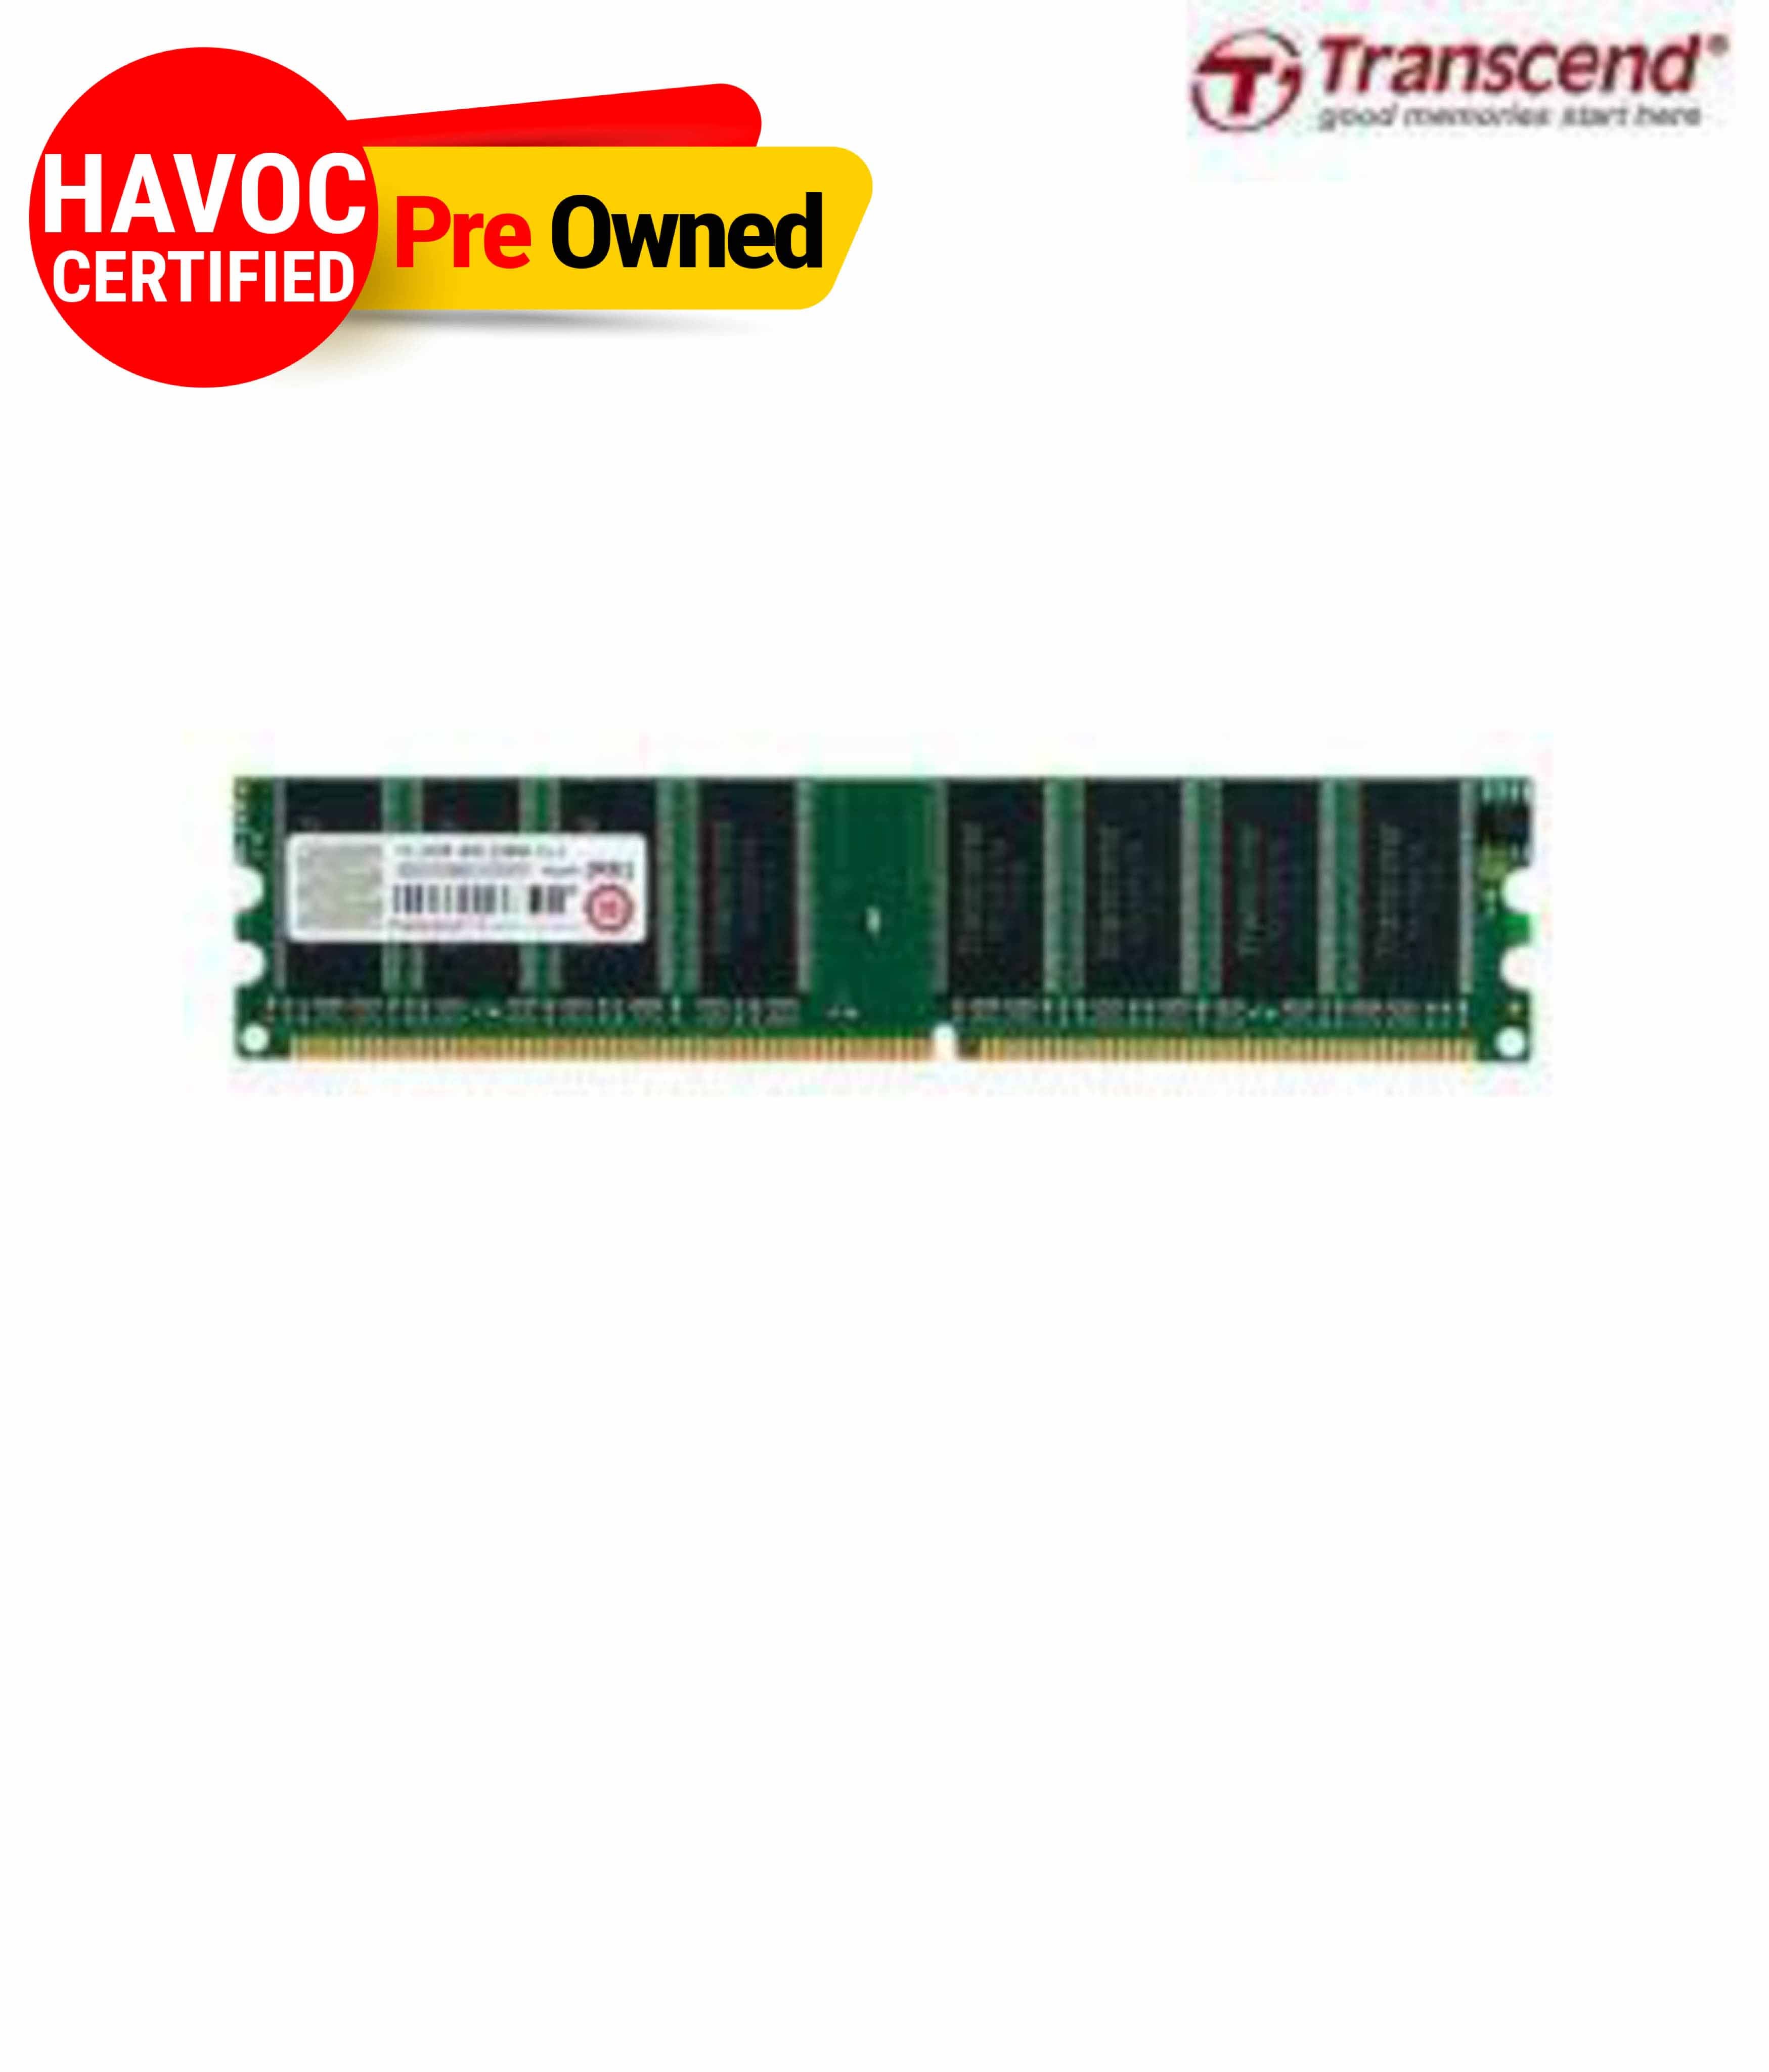 DDR 1GB 400MHZ TRANSCEND(QUALITY PRE OWNED)